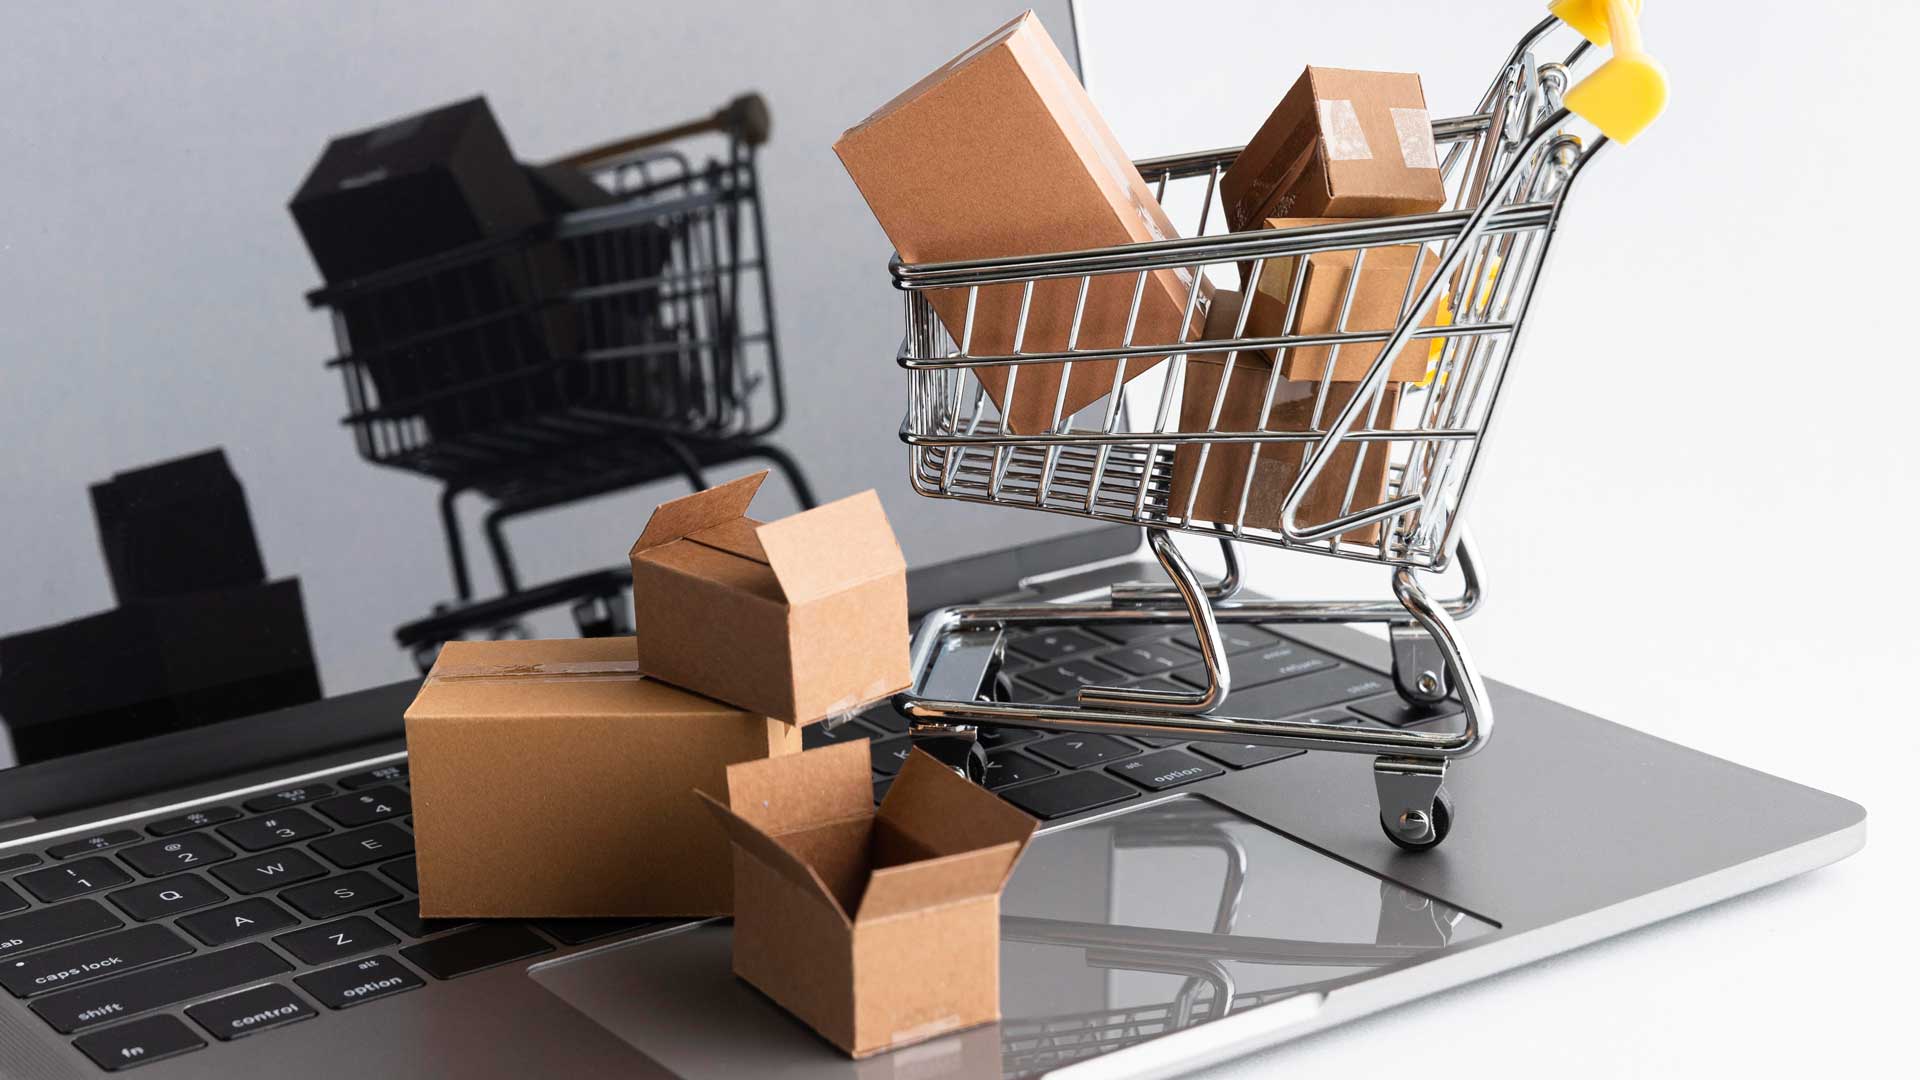 Multiple Dropshipping Stores – How To Set Up and Manage Multiple Dropship Stores